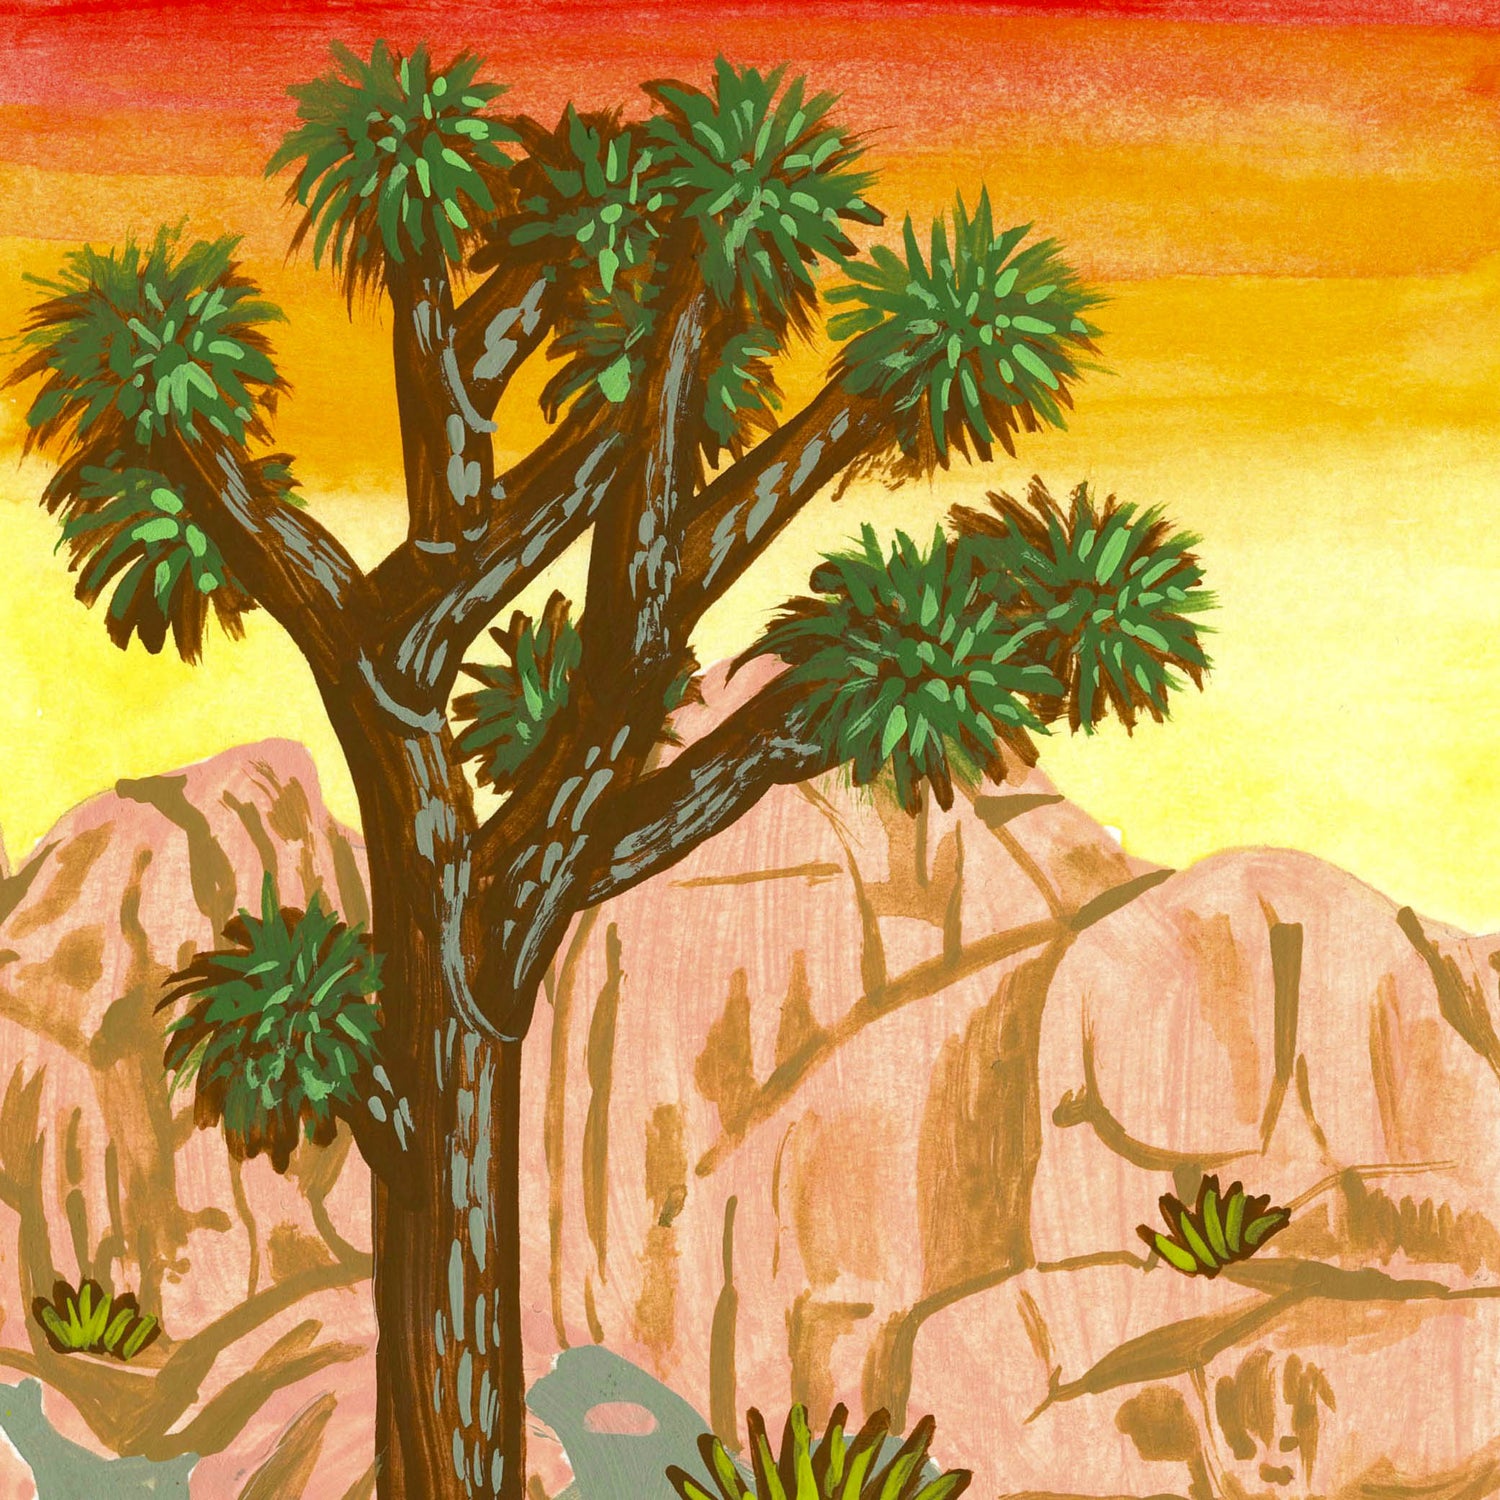 Joshua Tree National Park art detail with Coachella Valley, Mojave Desert, rock formations, and cactus garden; trendy illustration by Angela Staehling